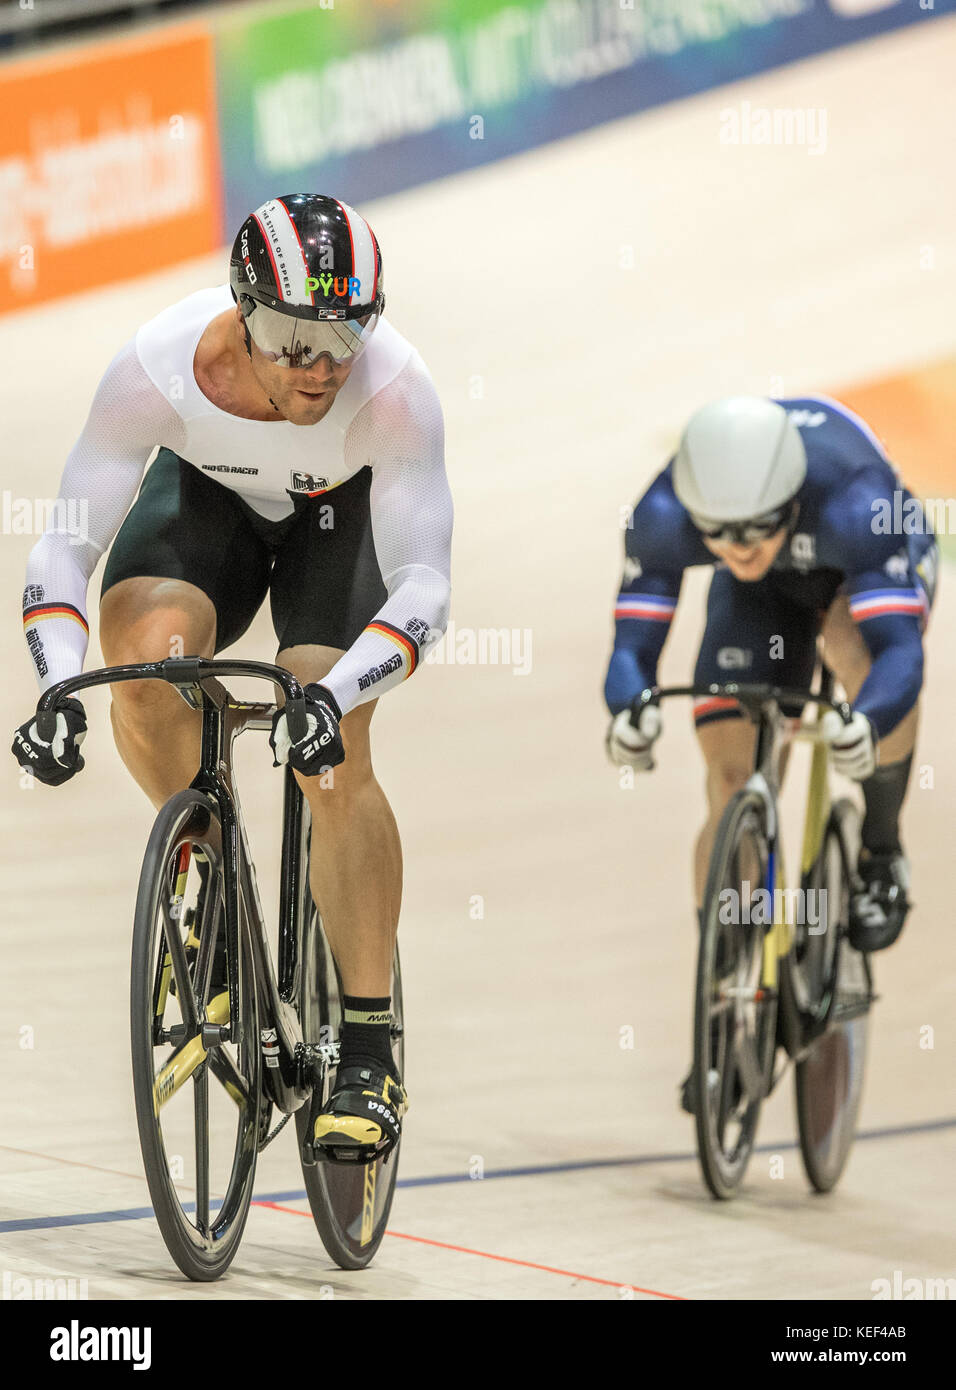 Maximilan Levy (front) of Germany in action in the quarter final against Sebastian Vigier of France in the men's sprint race at the Track European Championships 2017 in Berlin, Germany, 20 October 2017. Photo: Jens Büttner/dpa-Zentralbild/dpa Stock Photo